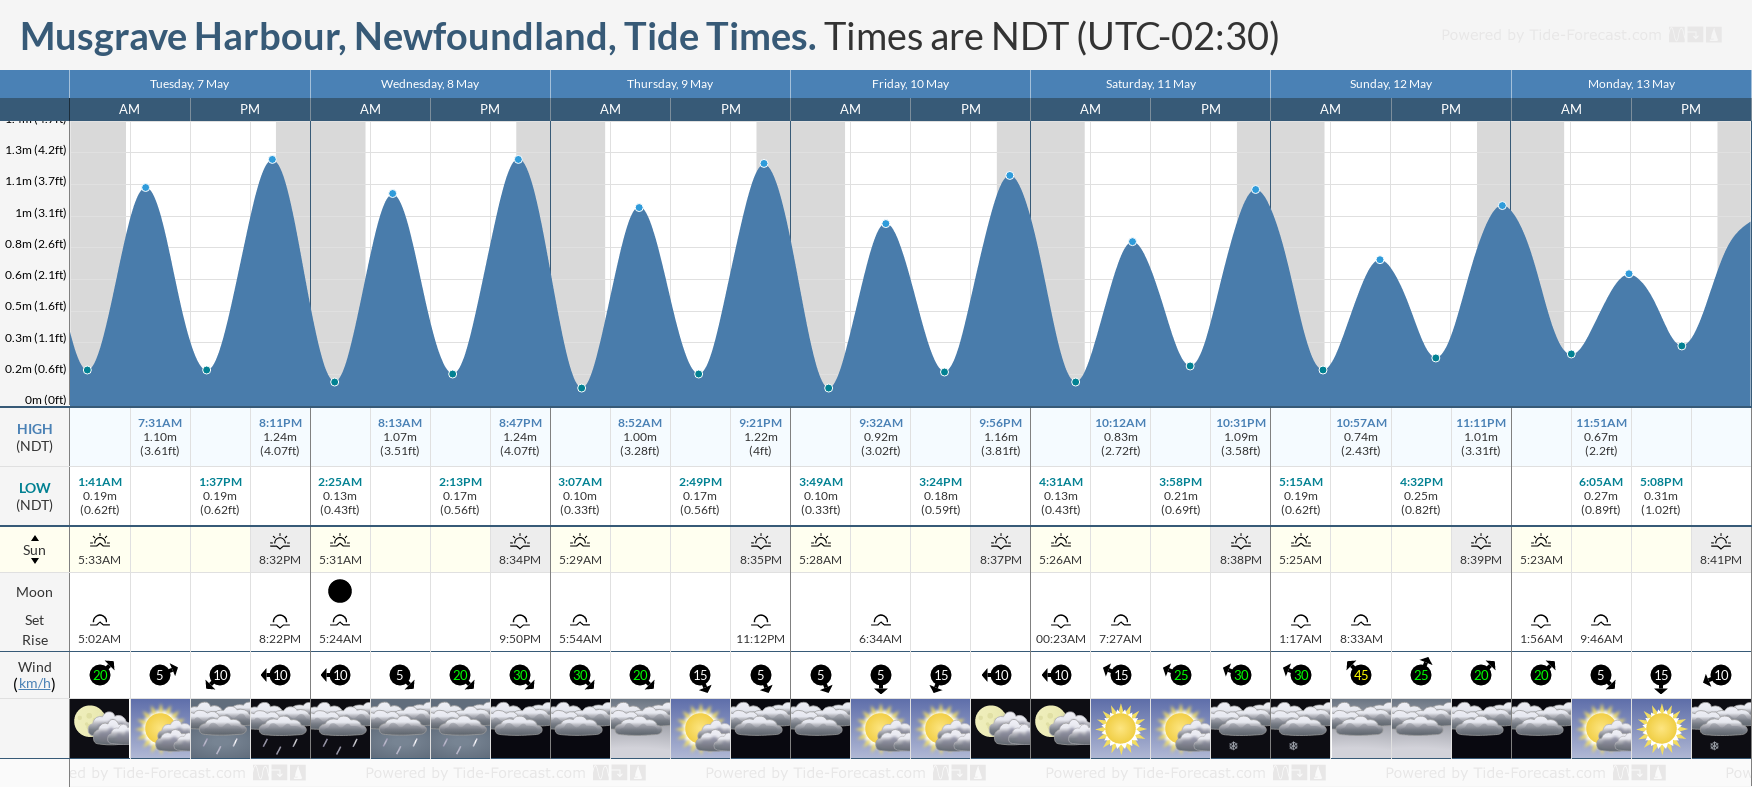 Musgrave Harbour, Newfoundland Tide Chart including high and low tide tide times for the next 7 days